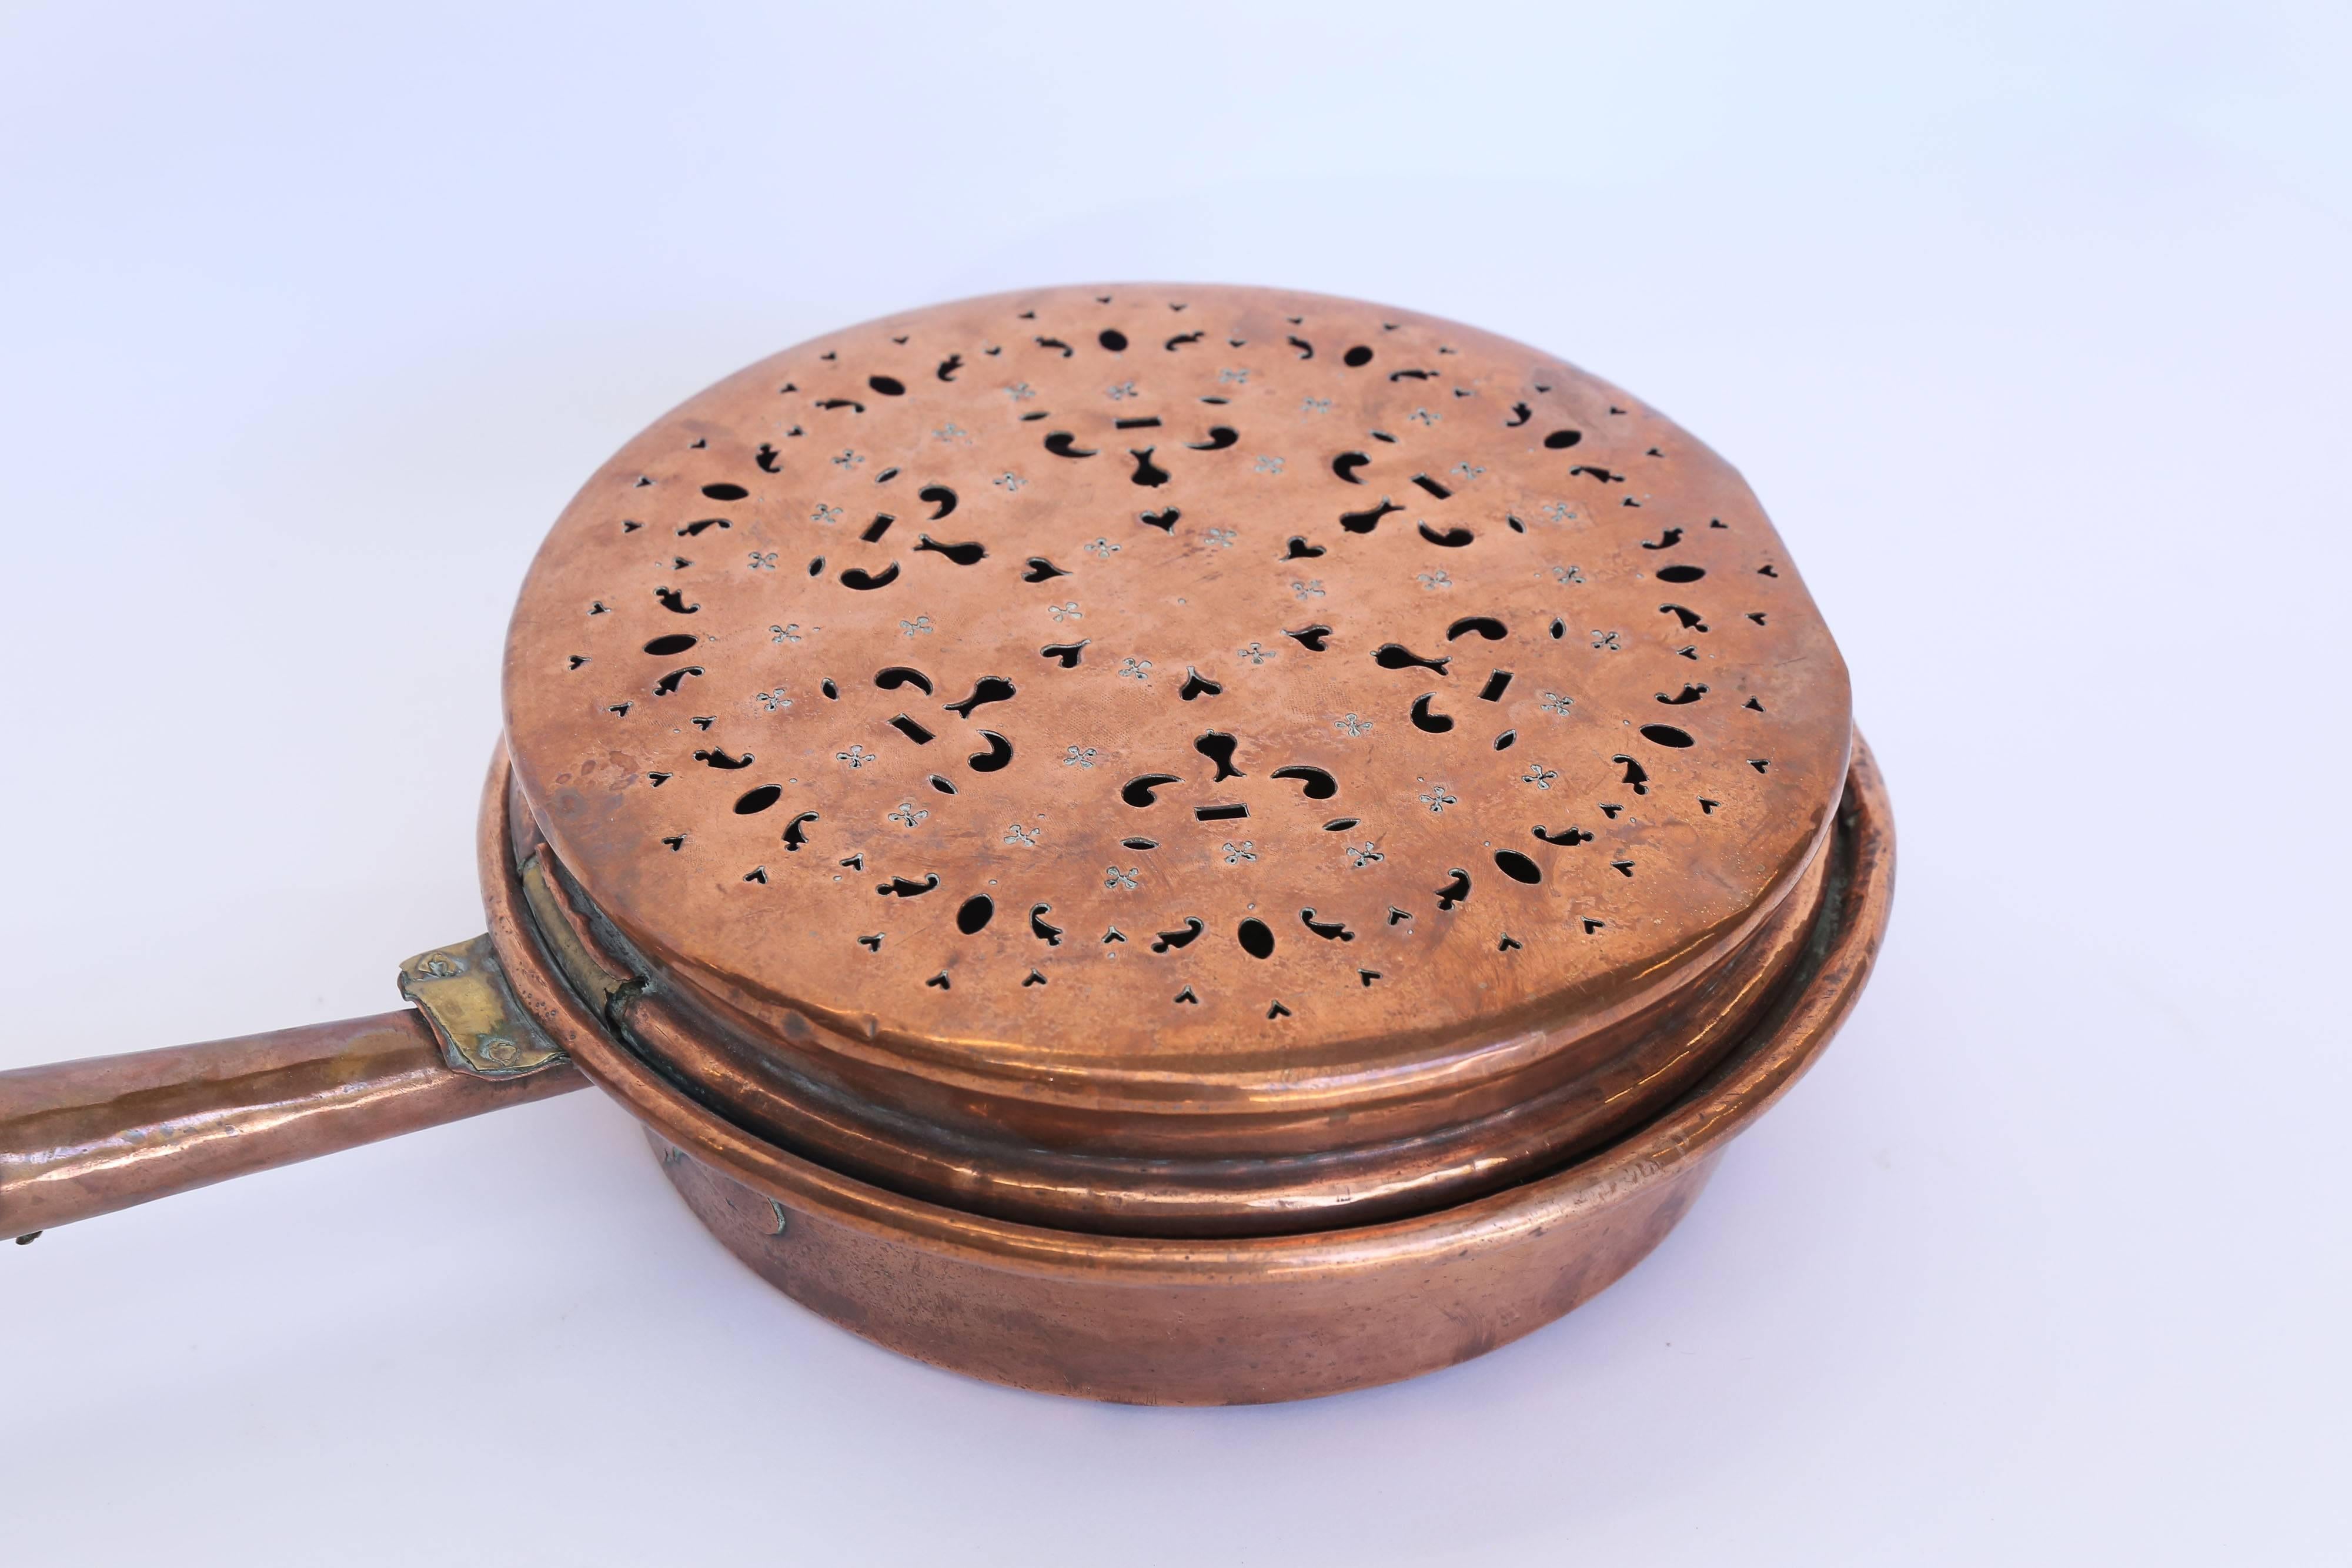 From France, a chestnut fireplace roaster made of copper with a wooden handle. The hinged lid is reticulated with oval, heart, and comma shaped piercings. The pan has some dings and dents and is in typical condition for an item of its age.